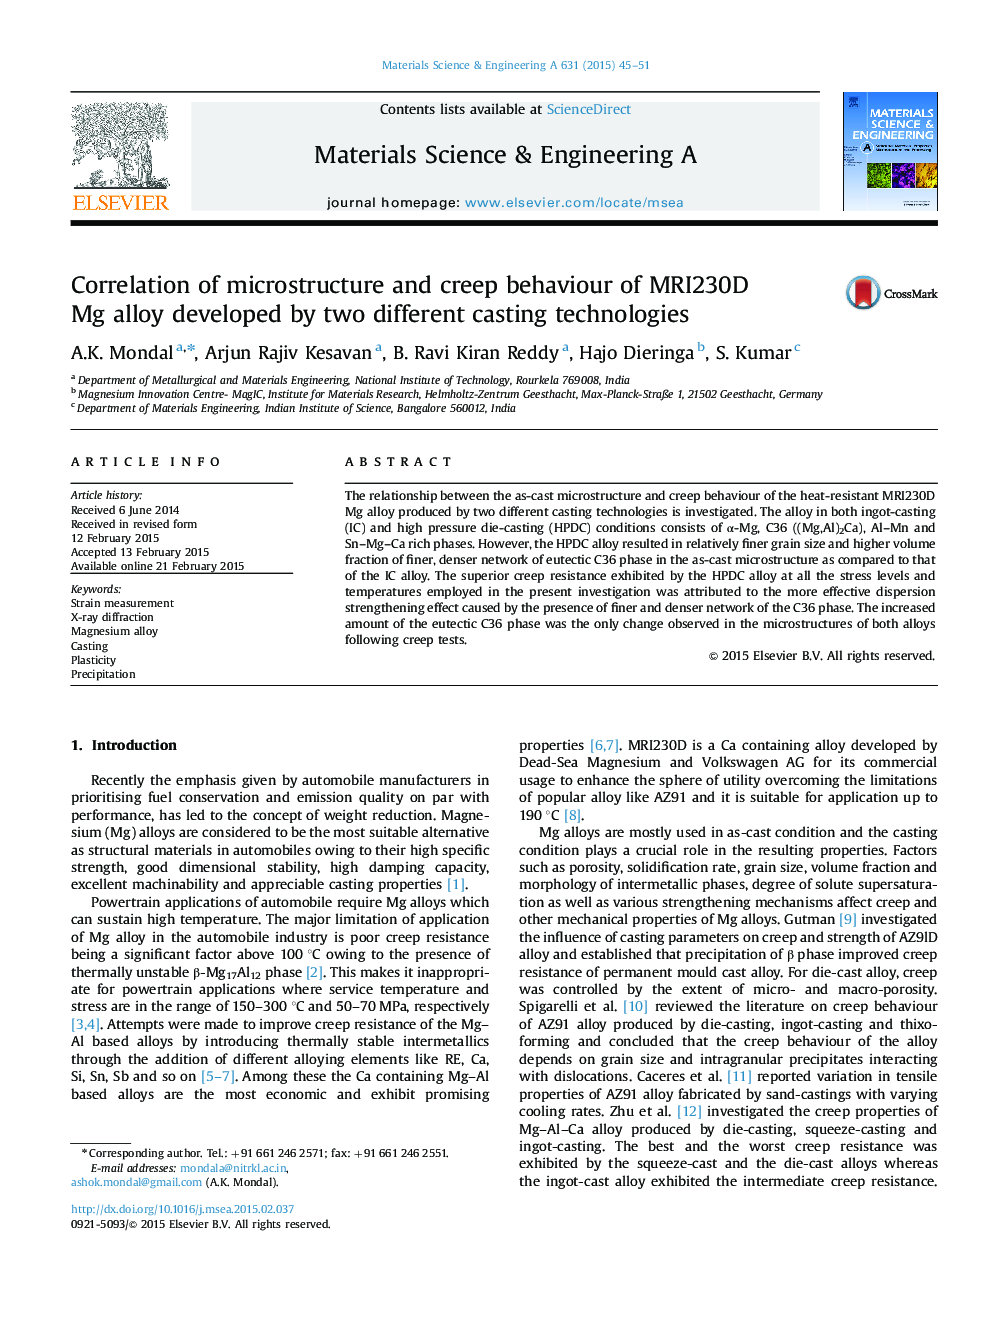 Correlation of microstructure and creep behaviour of MRI230D Mg alloy developed by two different casting technologies